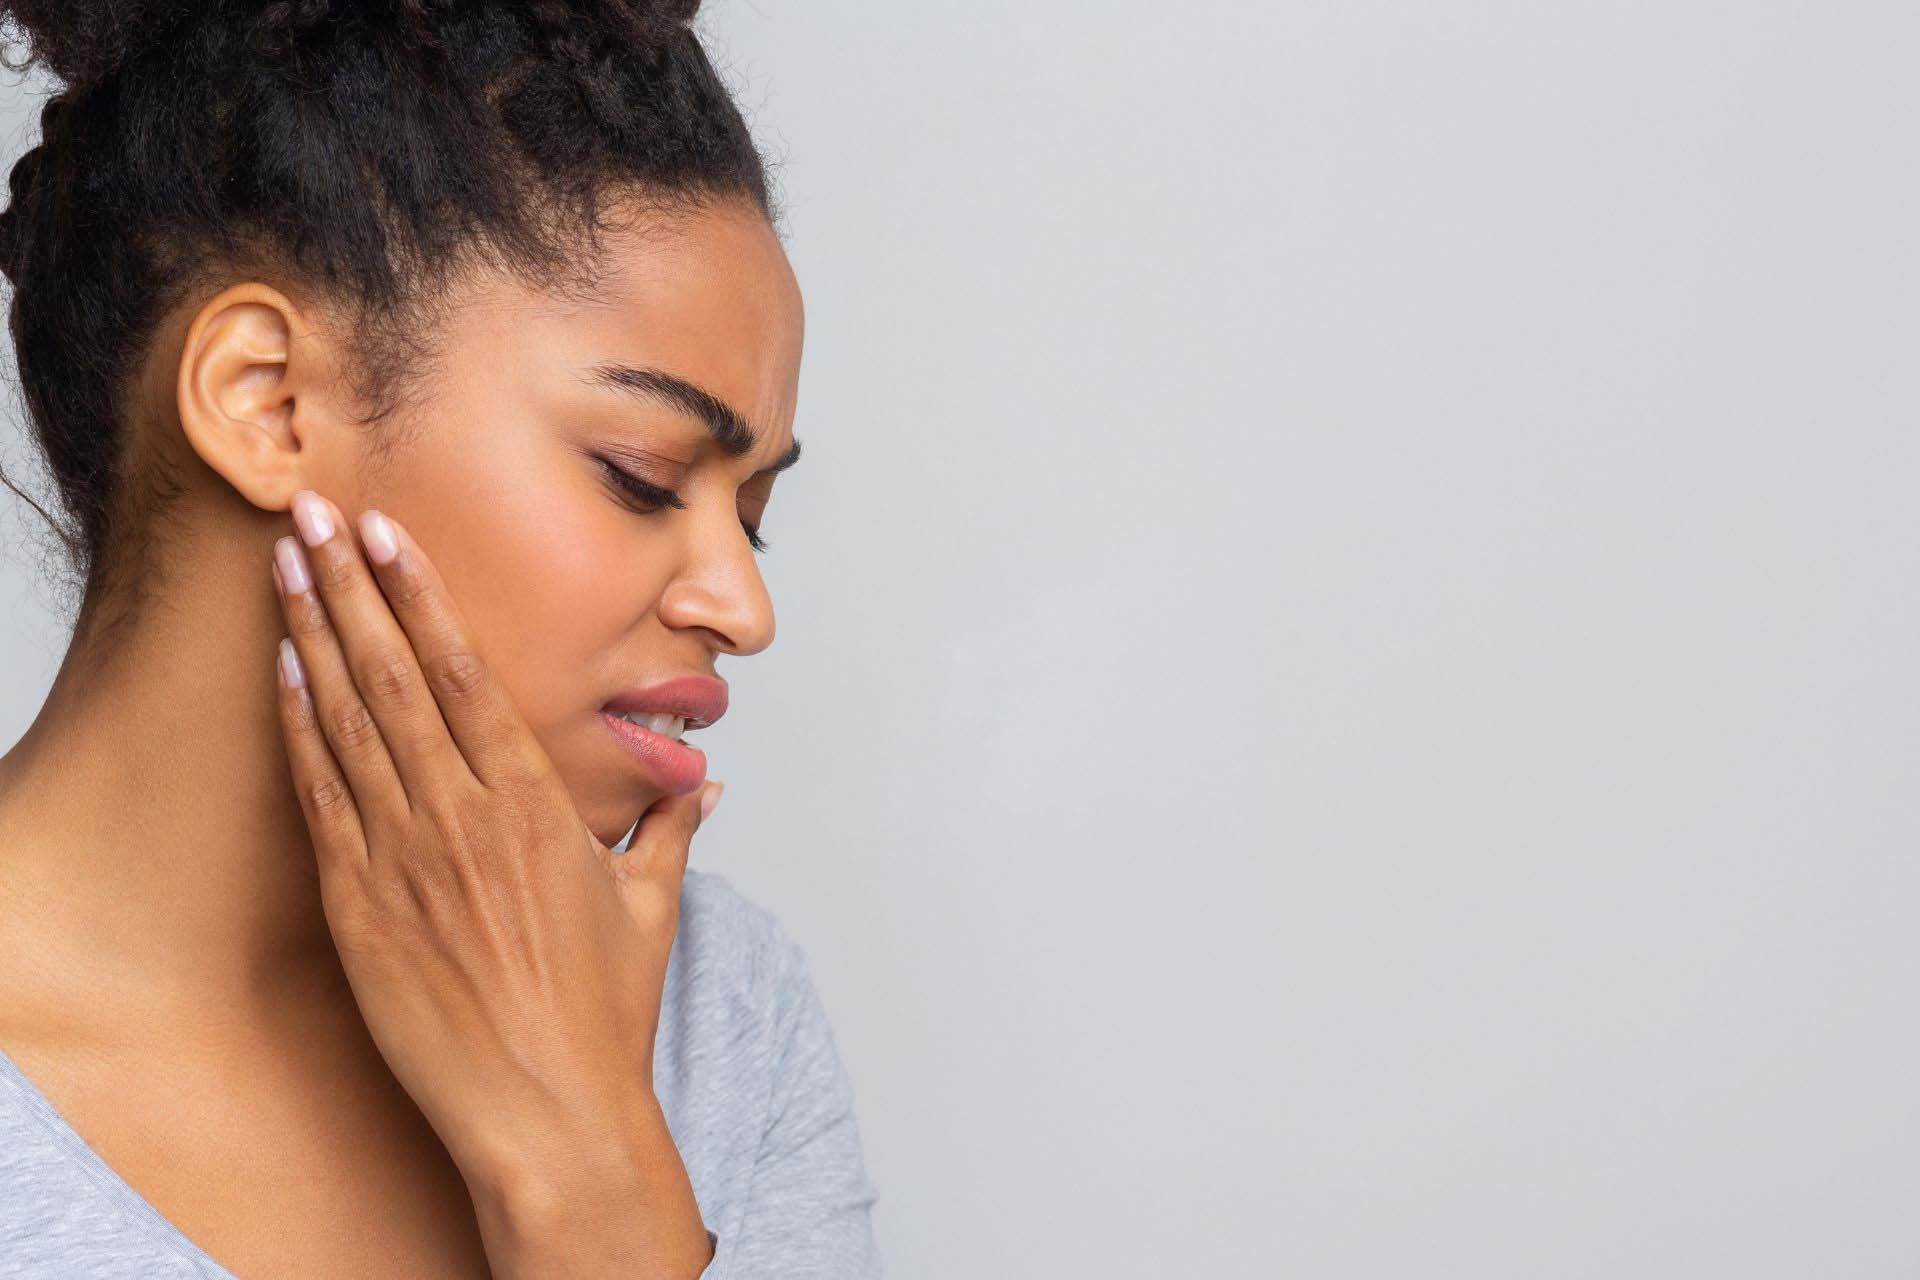 Woman holding jaw due to joint pain by her ears as she sees a TMJ specialist, Dr. Hakim near Brentwood, Los Angeles, who is treating TMJ for her.